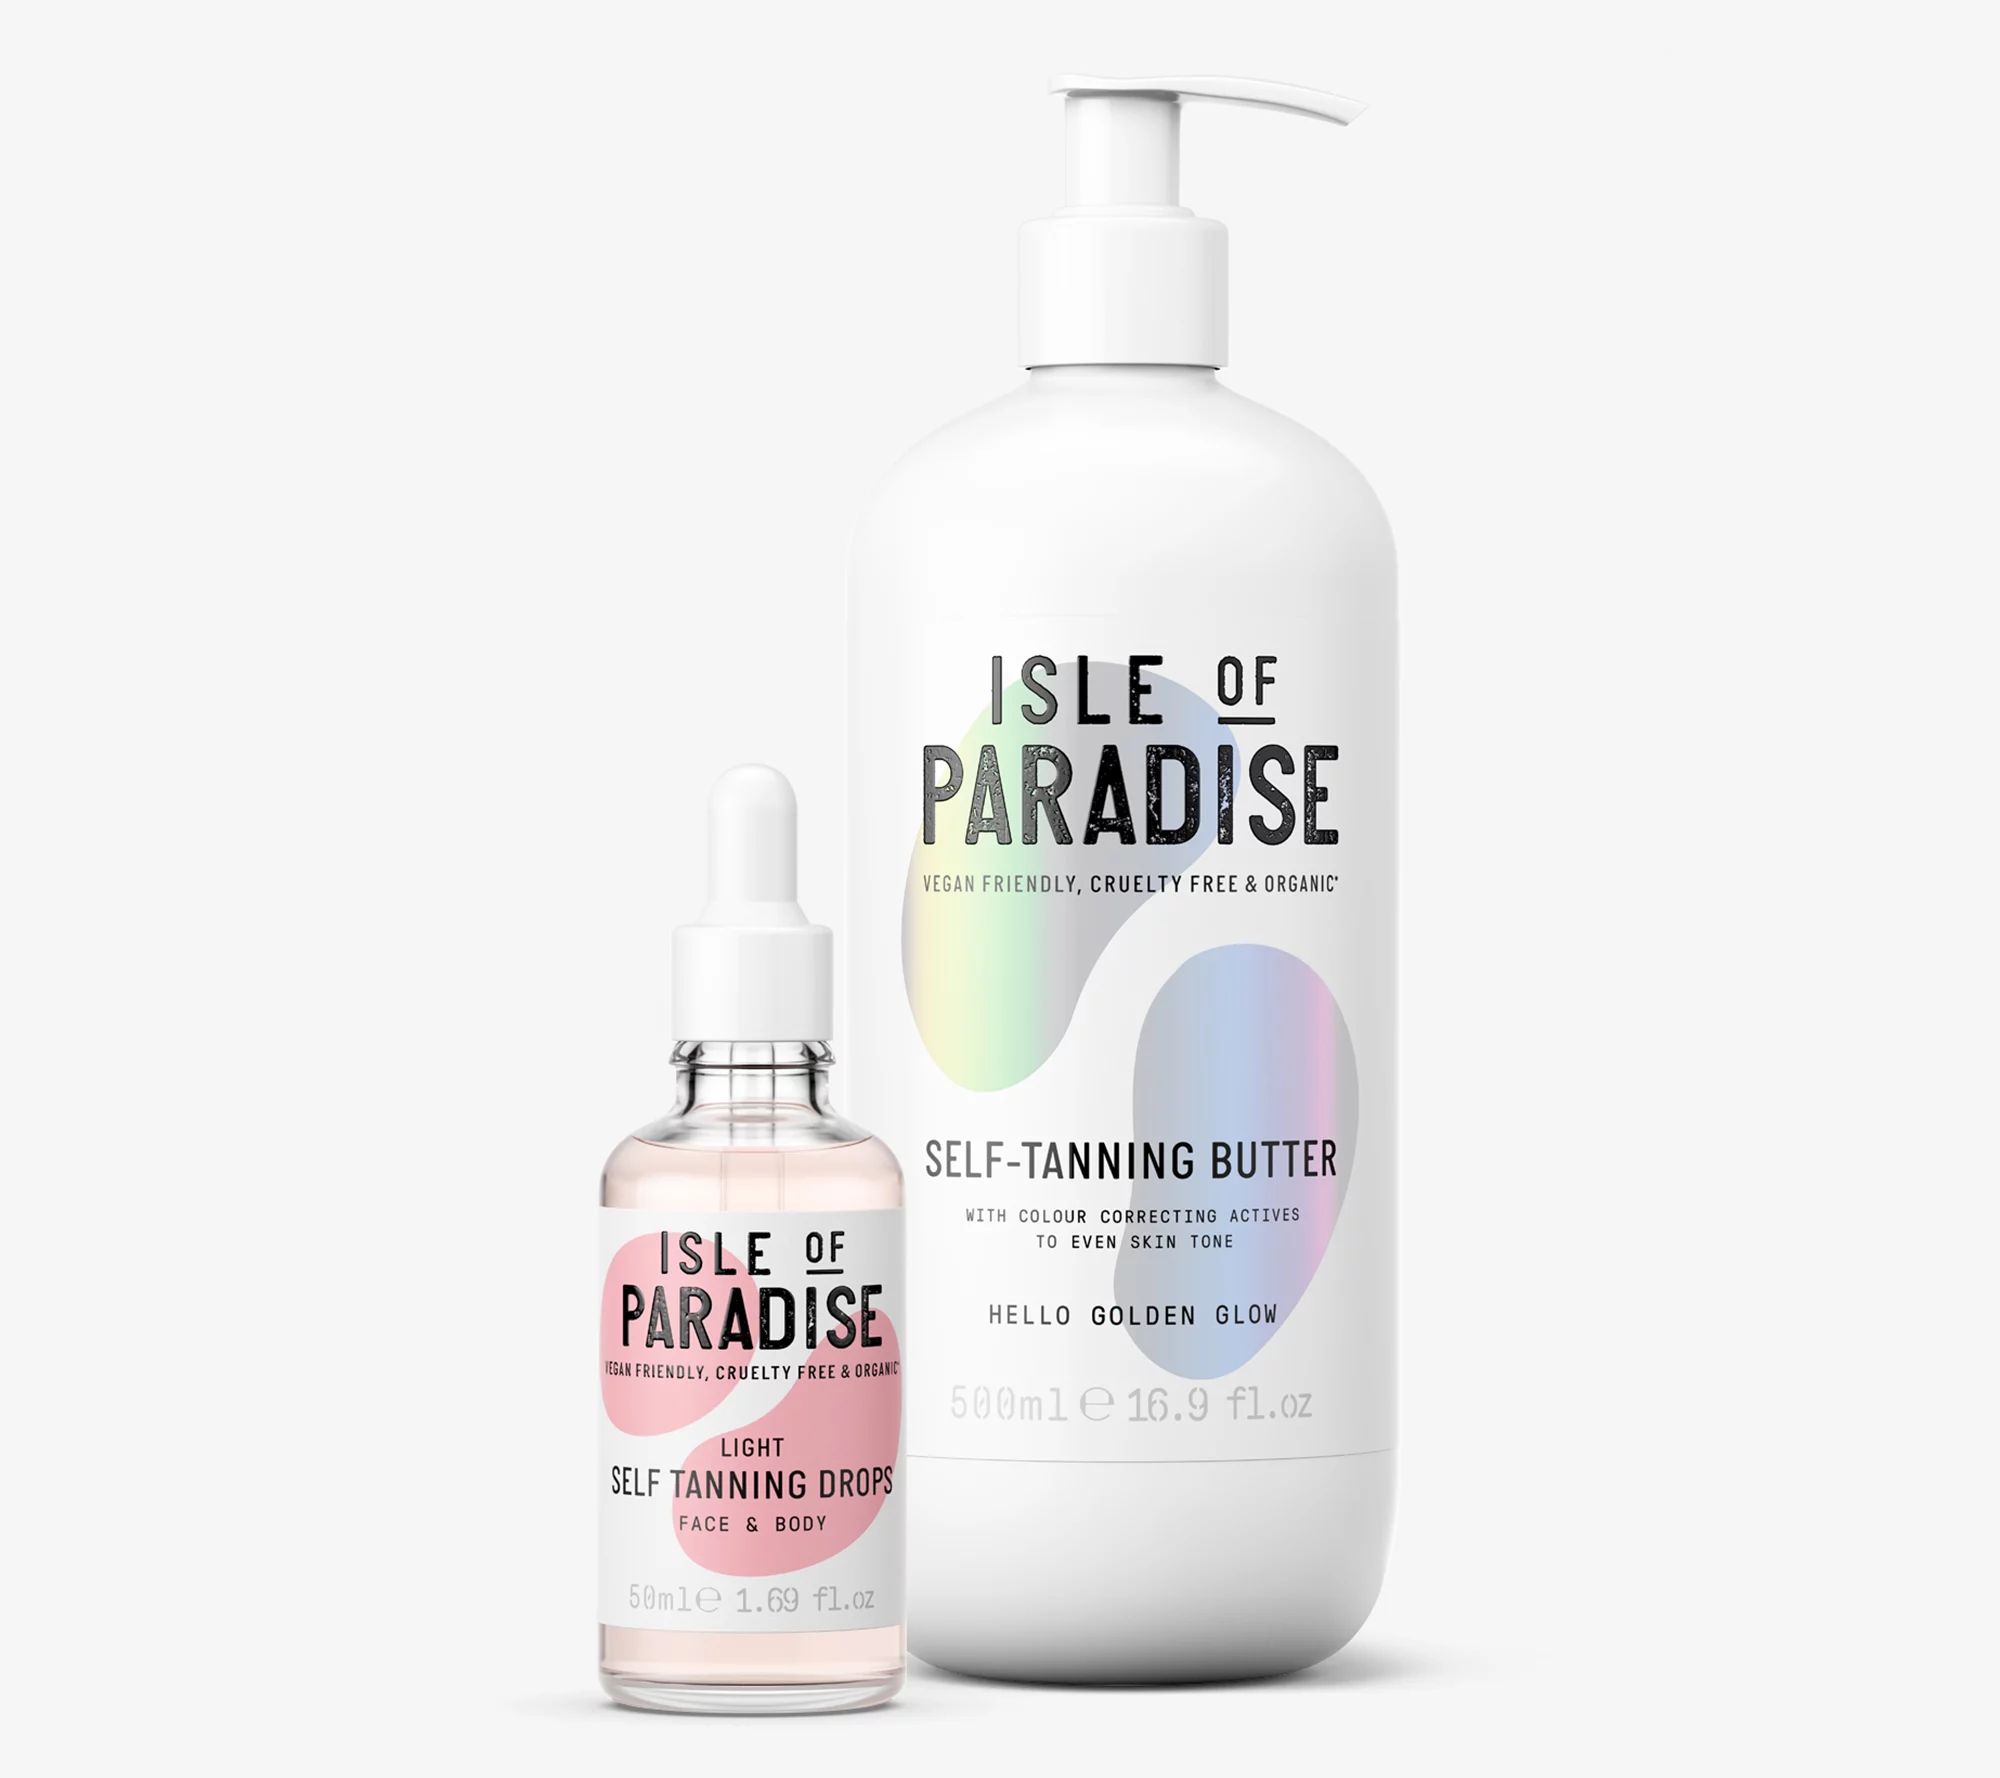 Isle of Paradise Super-Size Self-Tanning Drops & Butter | QVC